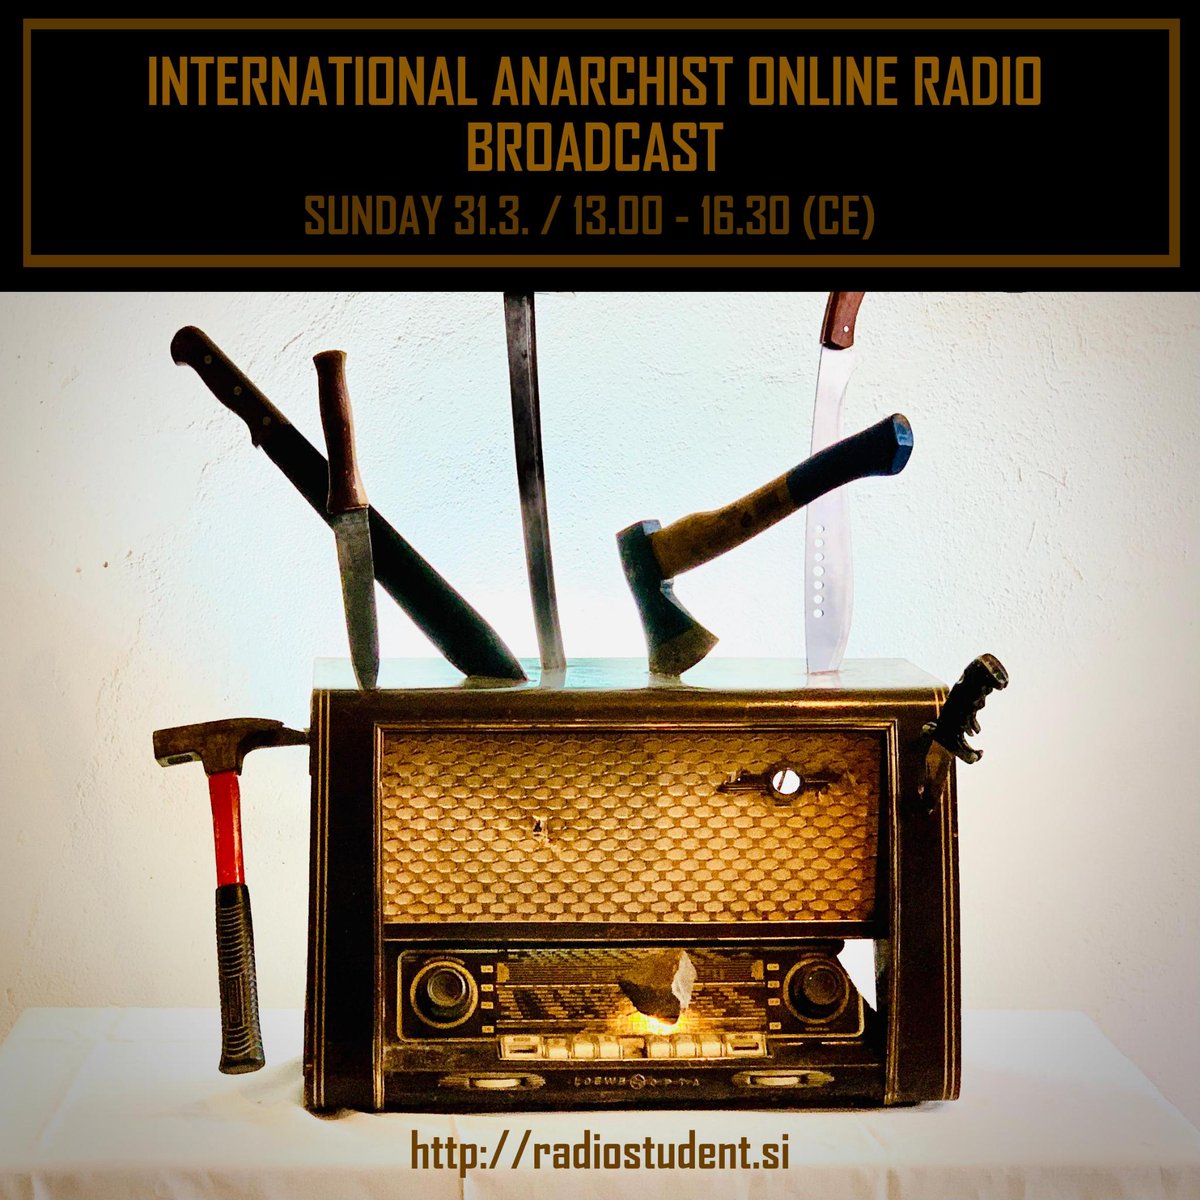 Sunday, March 31 from 13 - 16:30 Central European Time (8- 11:30am eastern on Turtle Island), hear from A-Radio Network projects around so-called Europe, Chile & little old us discussing (mostly in English but also Spanish) & reporting on various topics! radiostudent.si/druzba/crna-lu…